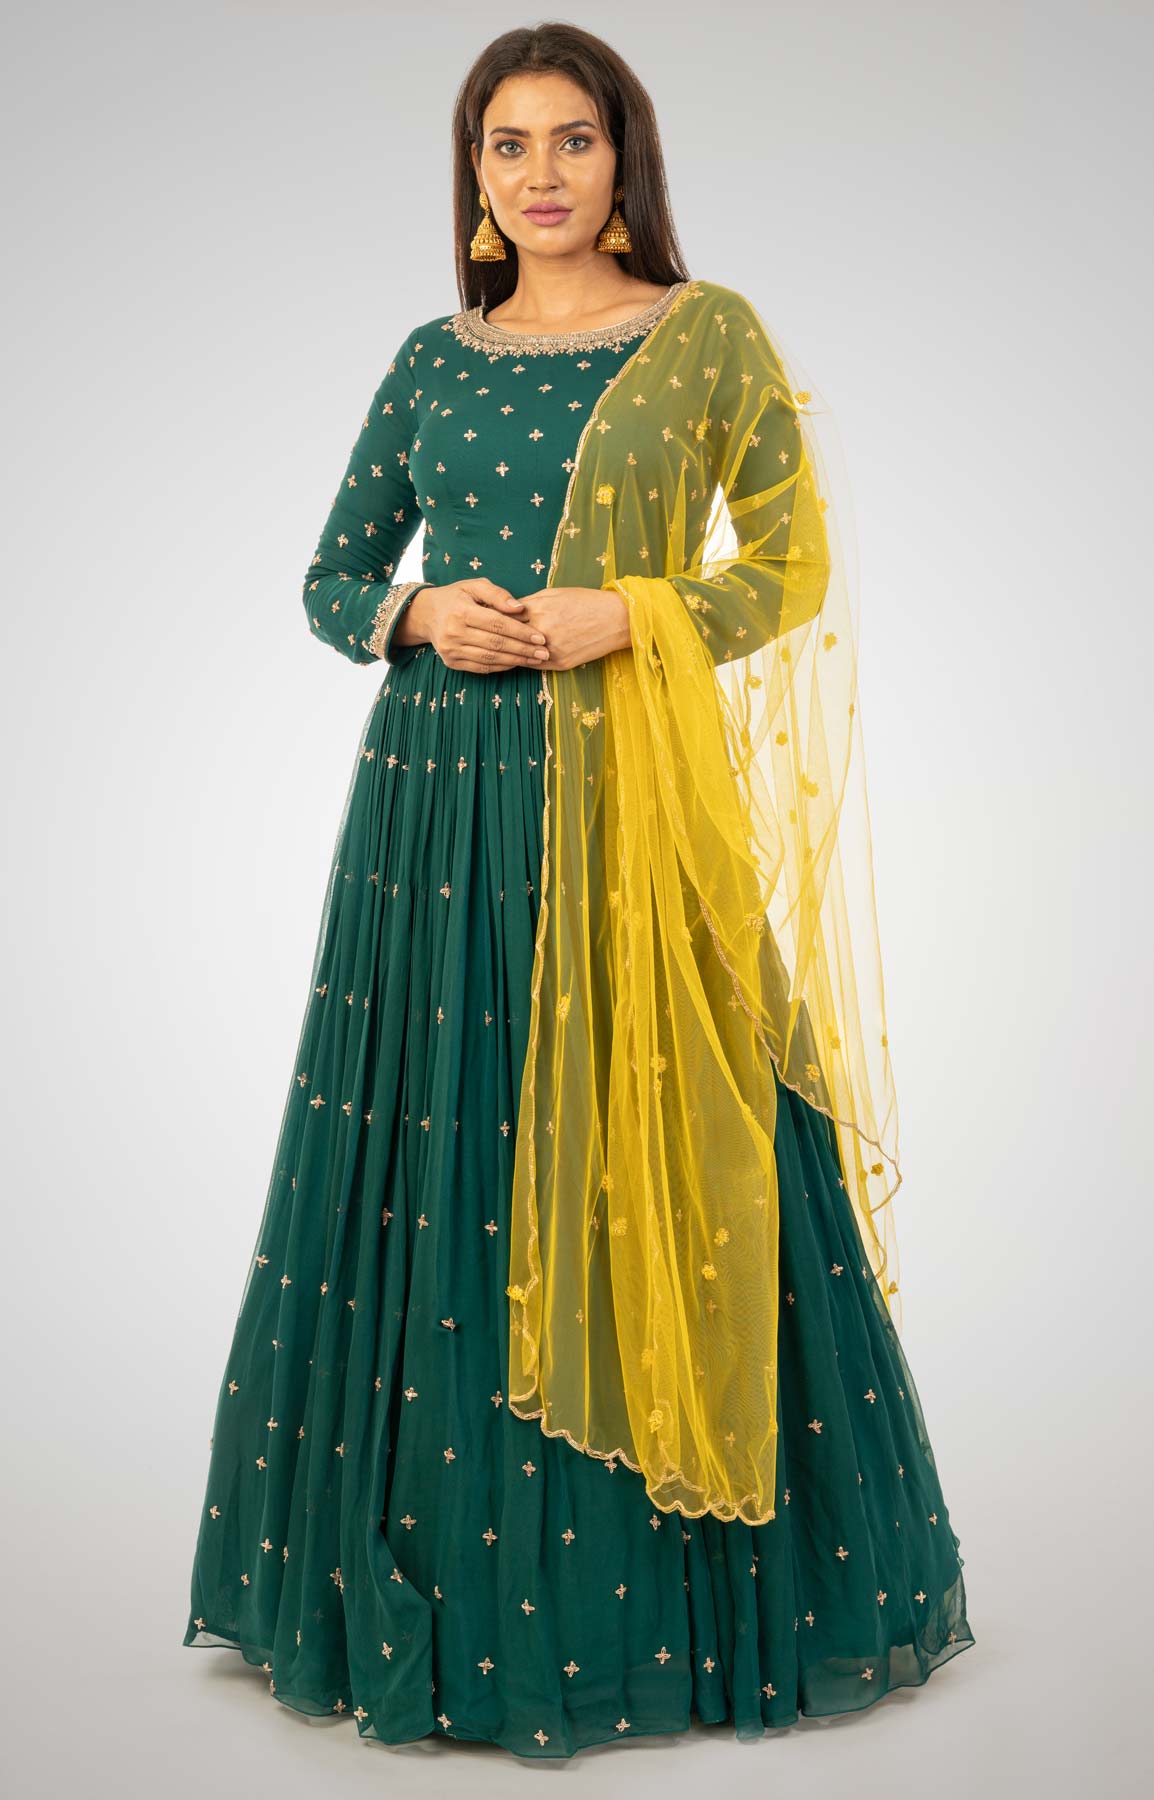 Bottle Green Anarkali Suit With Butti Work Paired With Contrasting Yellow Dupatta – Viraaya By Ushnakmals